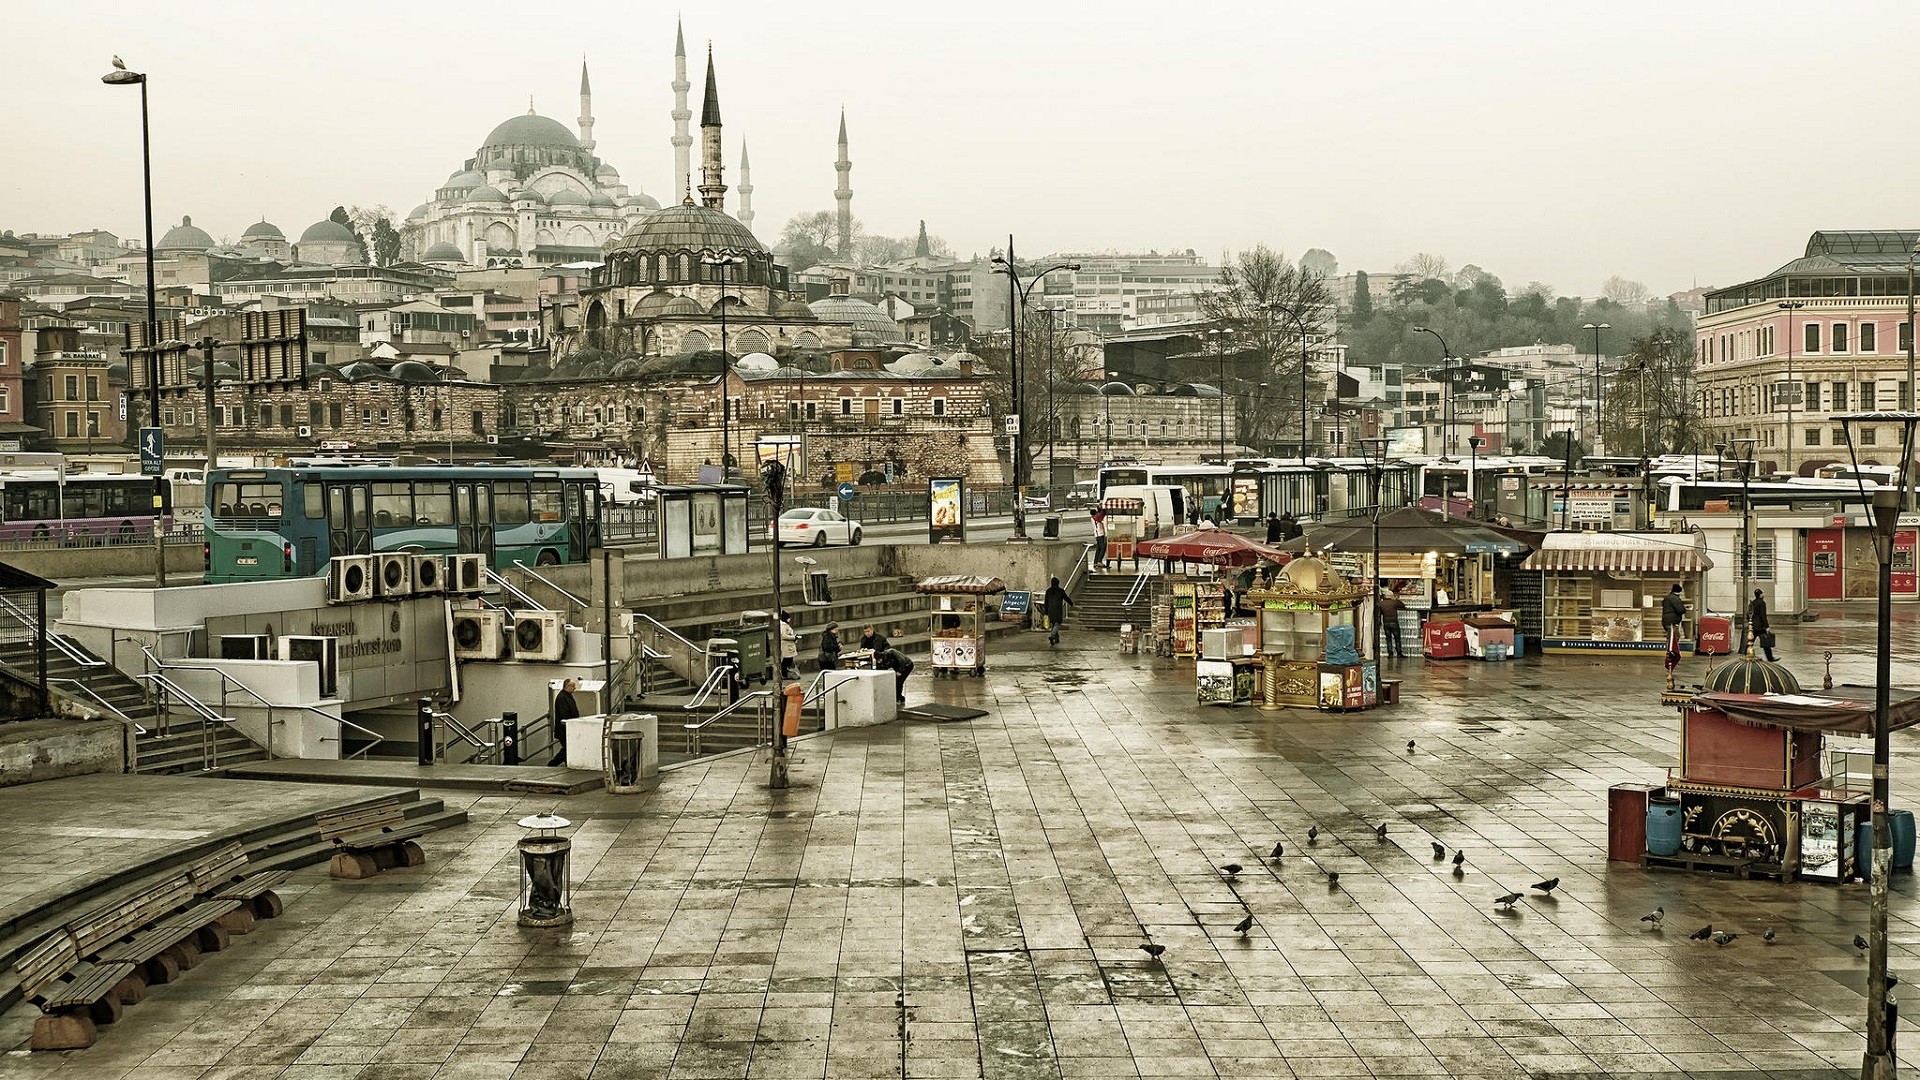 city, Istanbul, Turkey, Mosques, Architecture, Islamic Architecture, Building, Buses, Town Square, Car, Pigeons, Bench, Stairs, Overcast Wallpaper